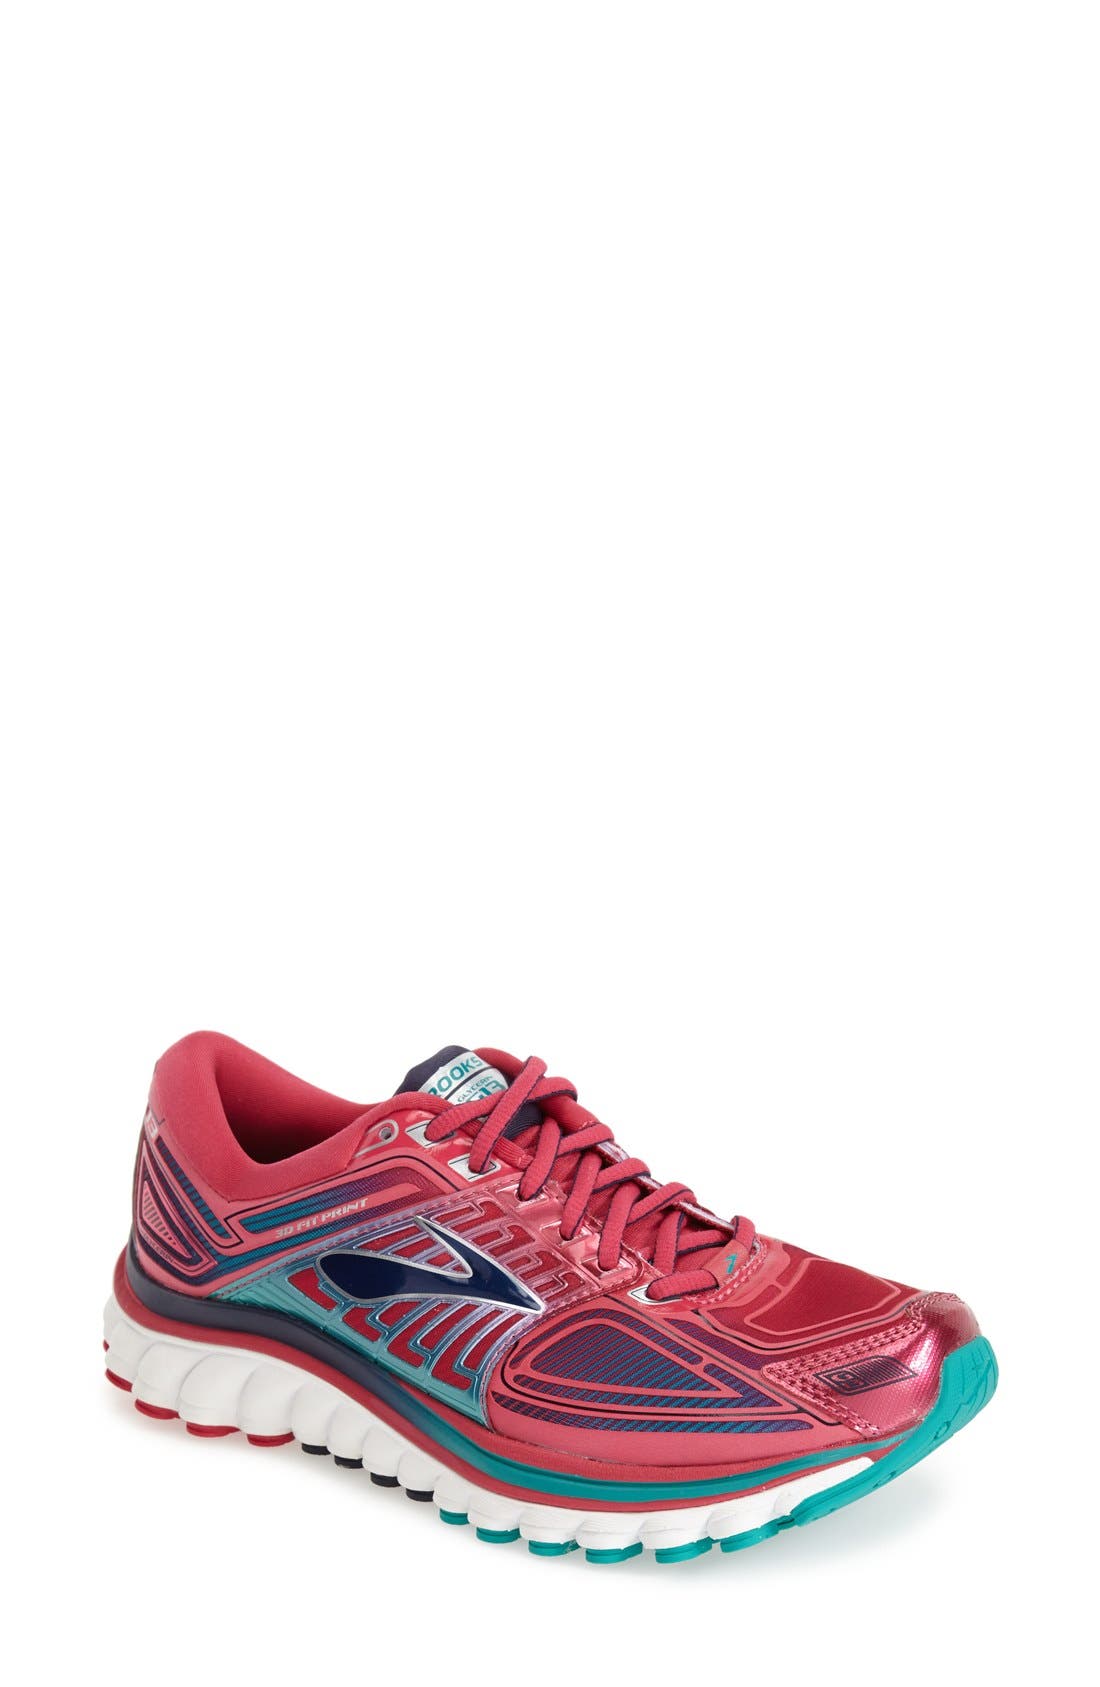 brooks glycerin 13 neutral running shoes